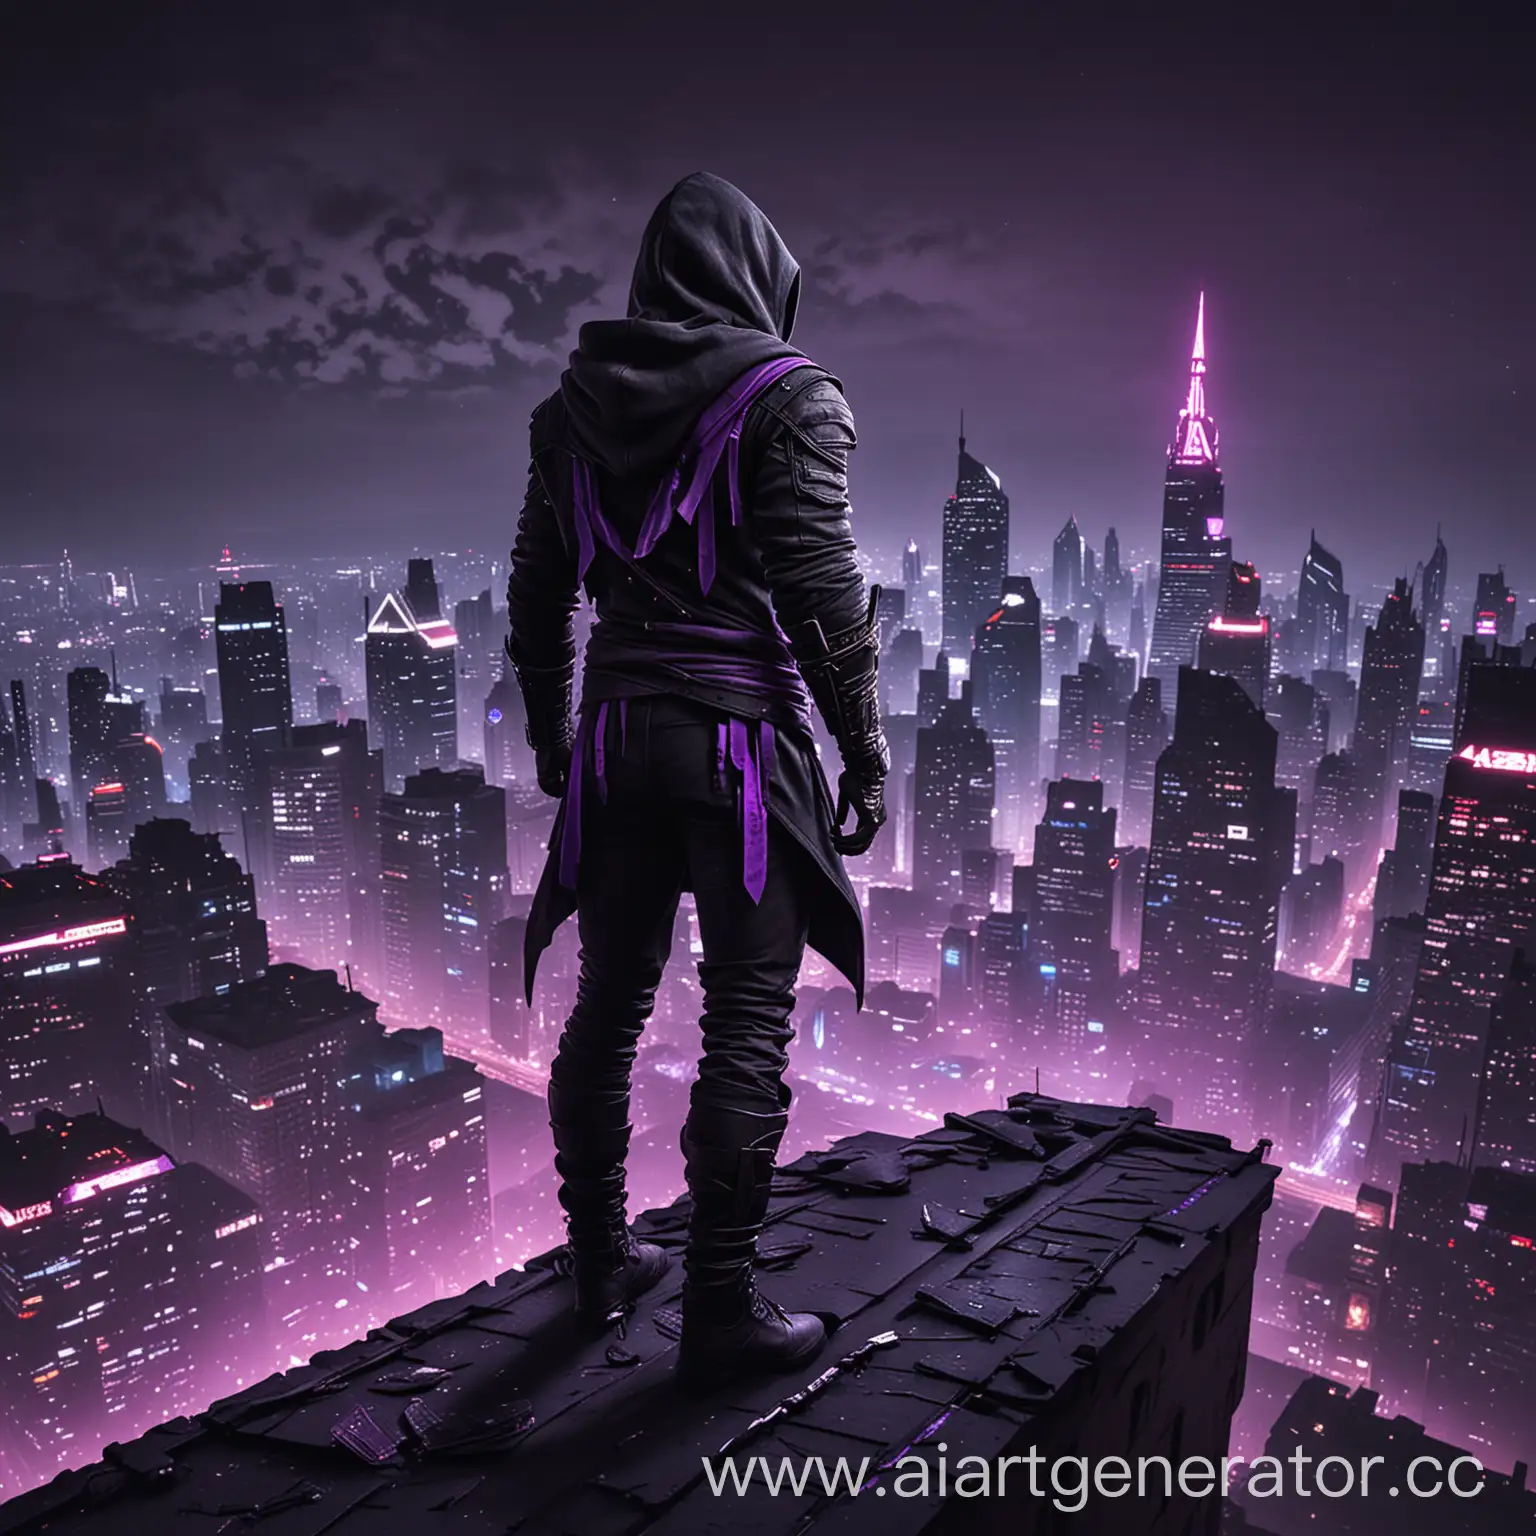 Silent killer (Assassin) stands on the roof With his back in hoodie in black clothing as in game Assasin creed night among neon skyscrapers with a little more purple color with hidden blades on hands.